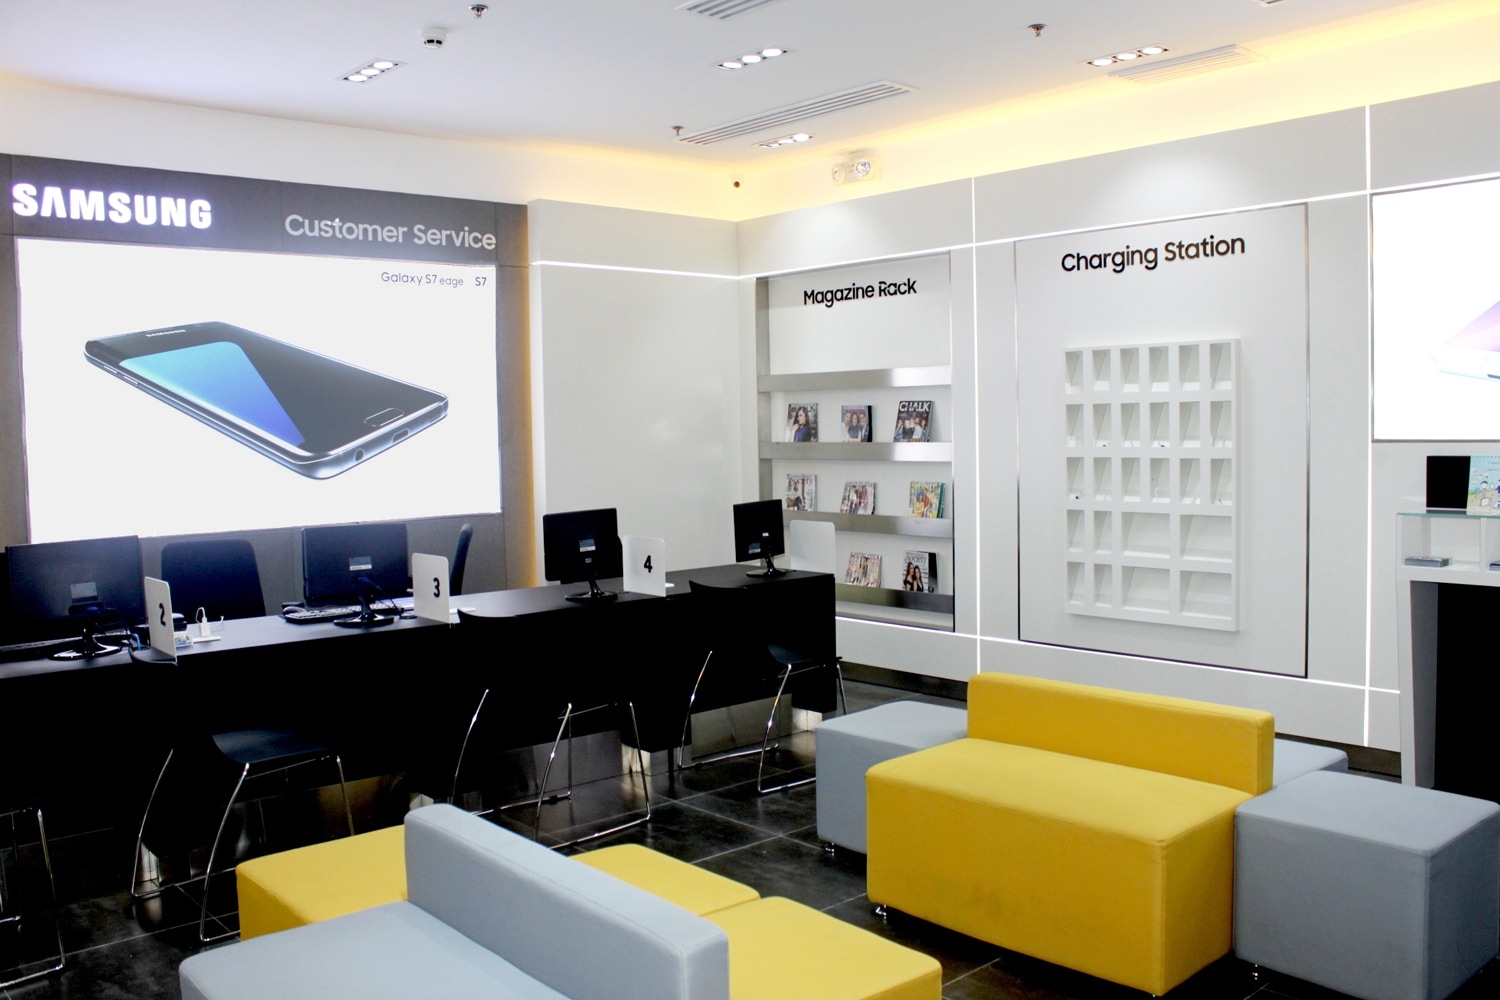 Samsung Ends Q1 with 4 New Service Centers